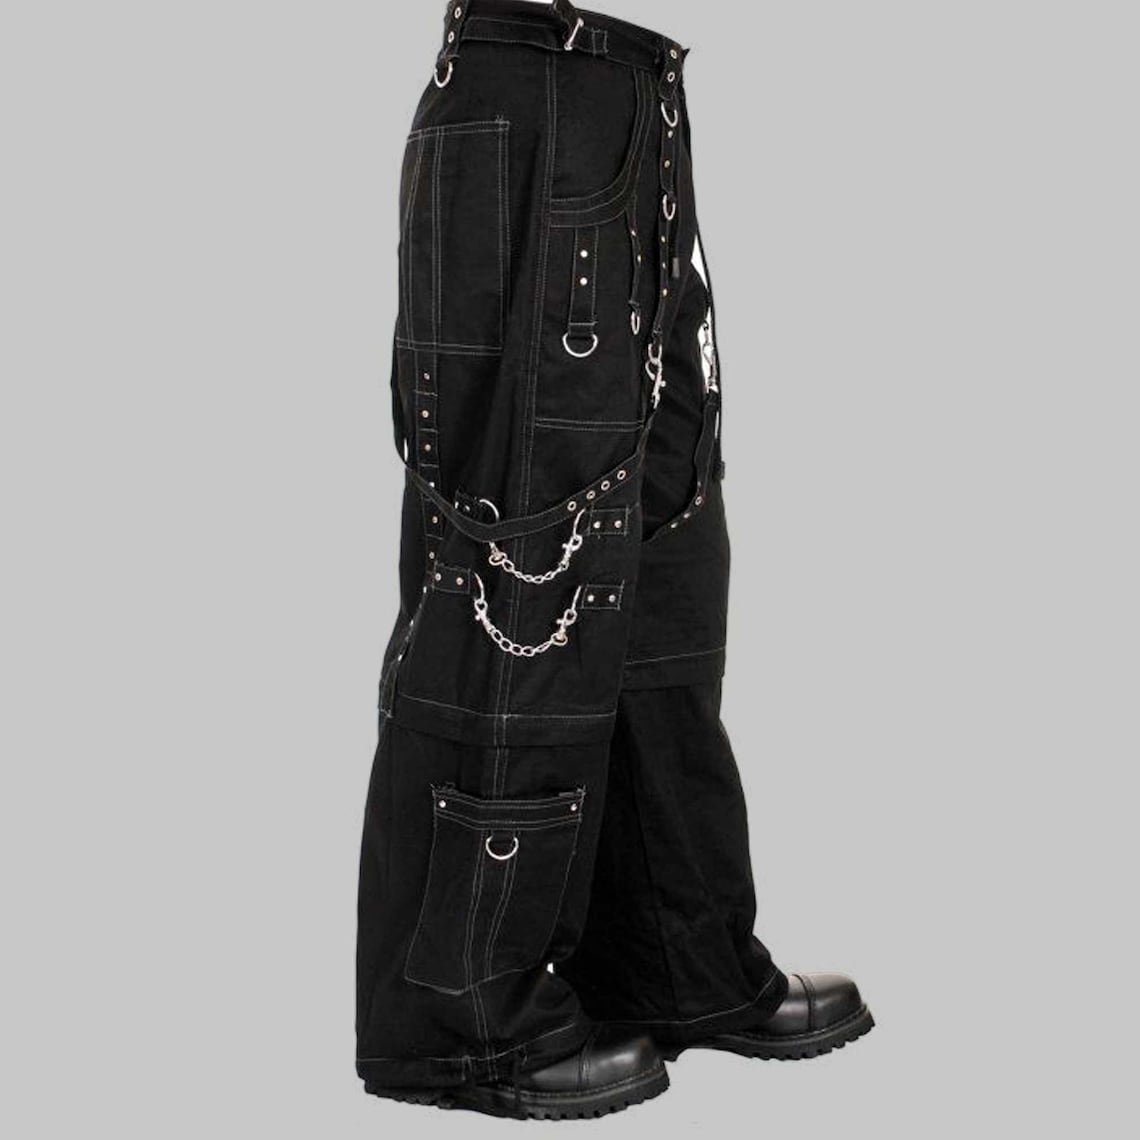 Men's Gothic, Industrial and Cyber pants.